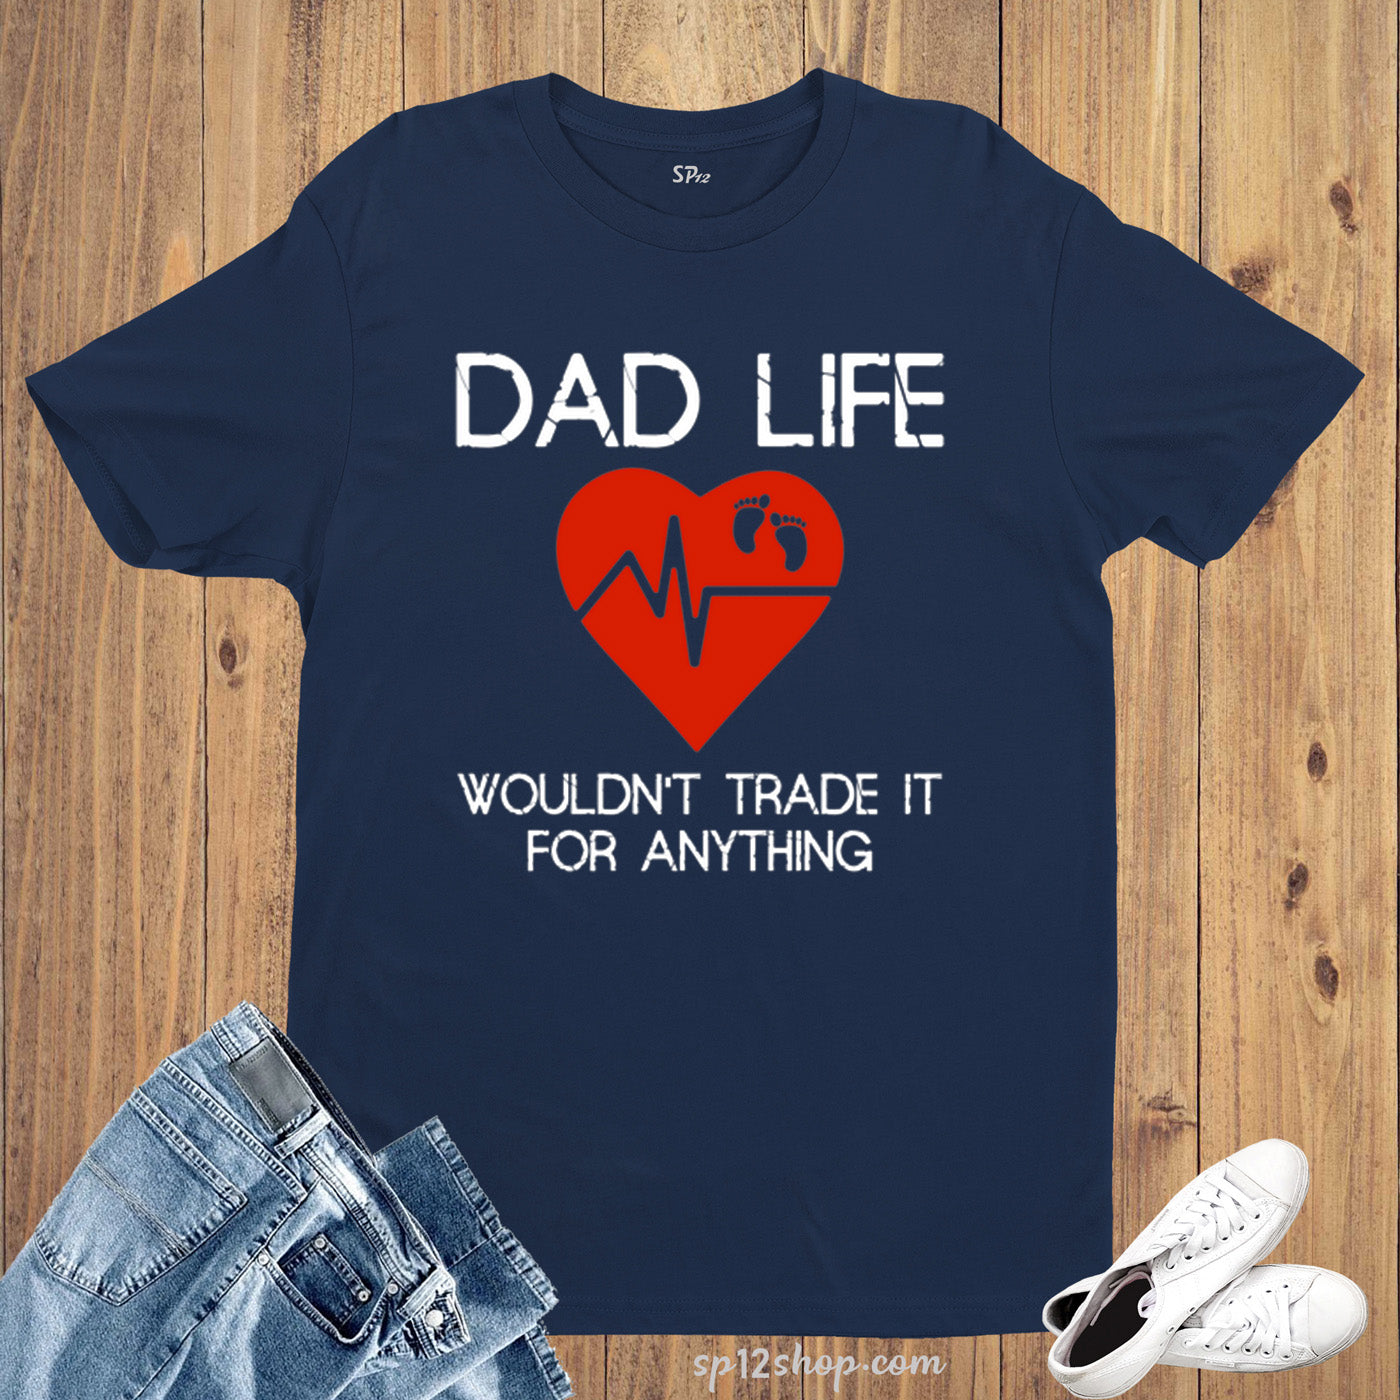 Family Daddy T Shirt Happy Fathers Day Dads Life tshirt tee